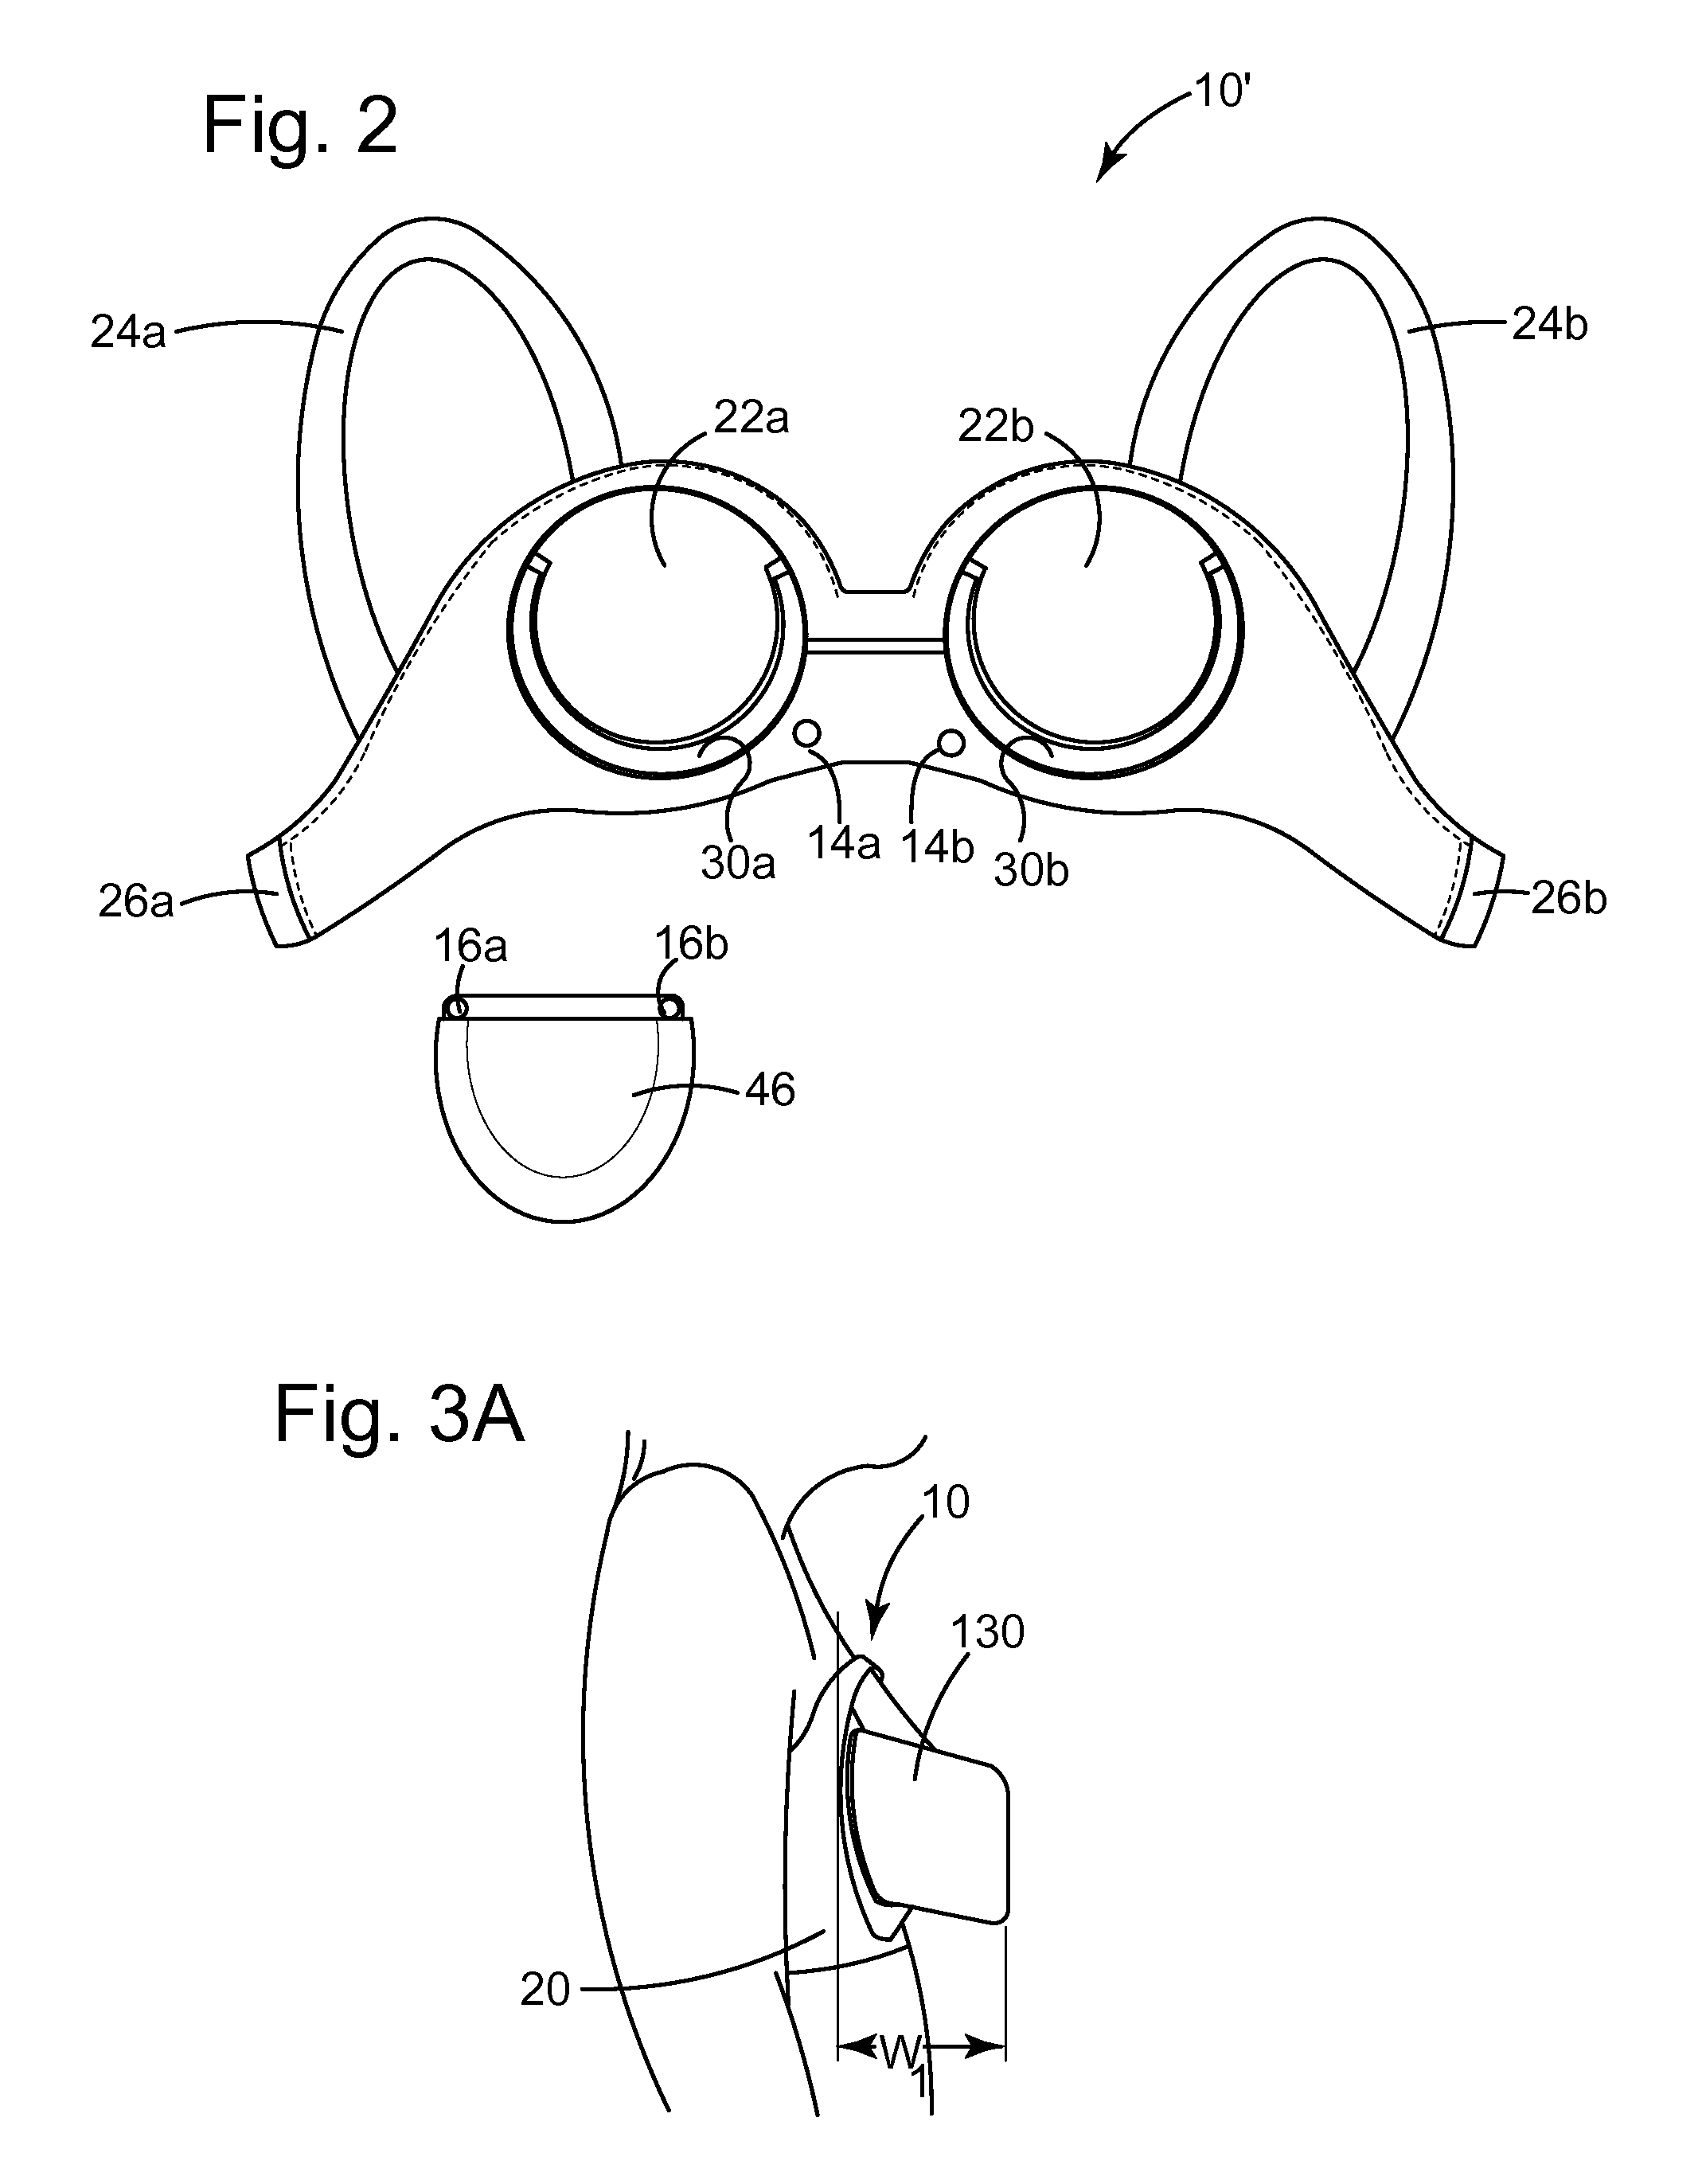 Apparatus and methods for compressing a woman's breast to express milk in a concealable manner